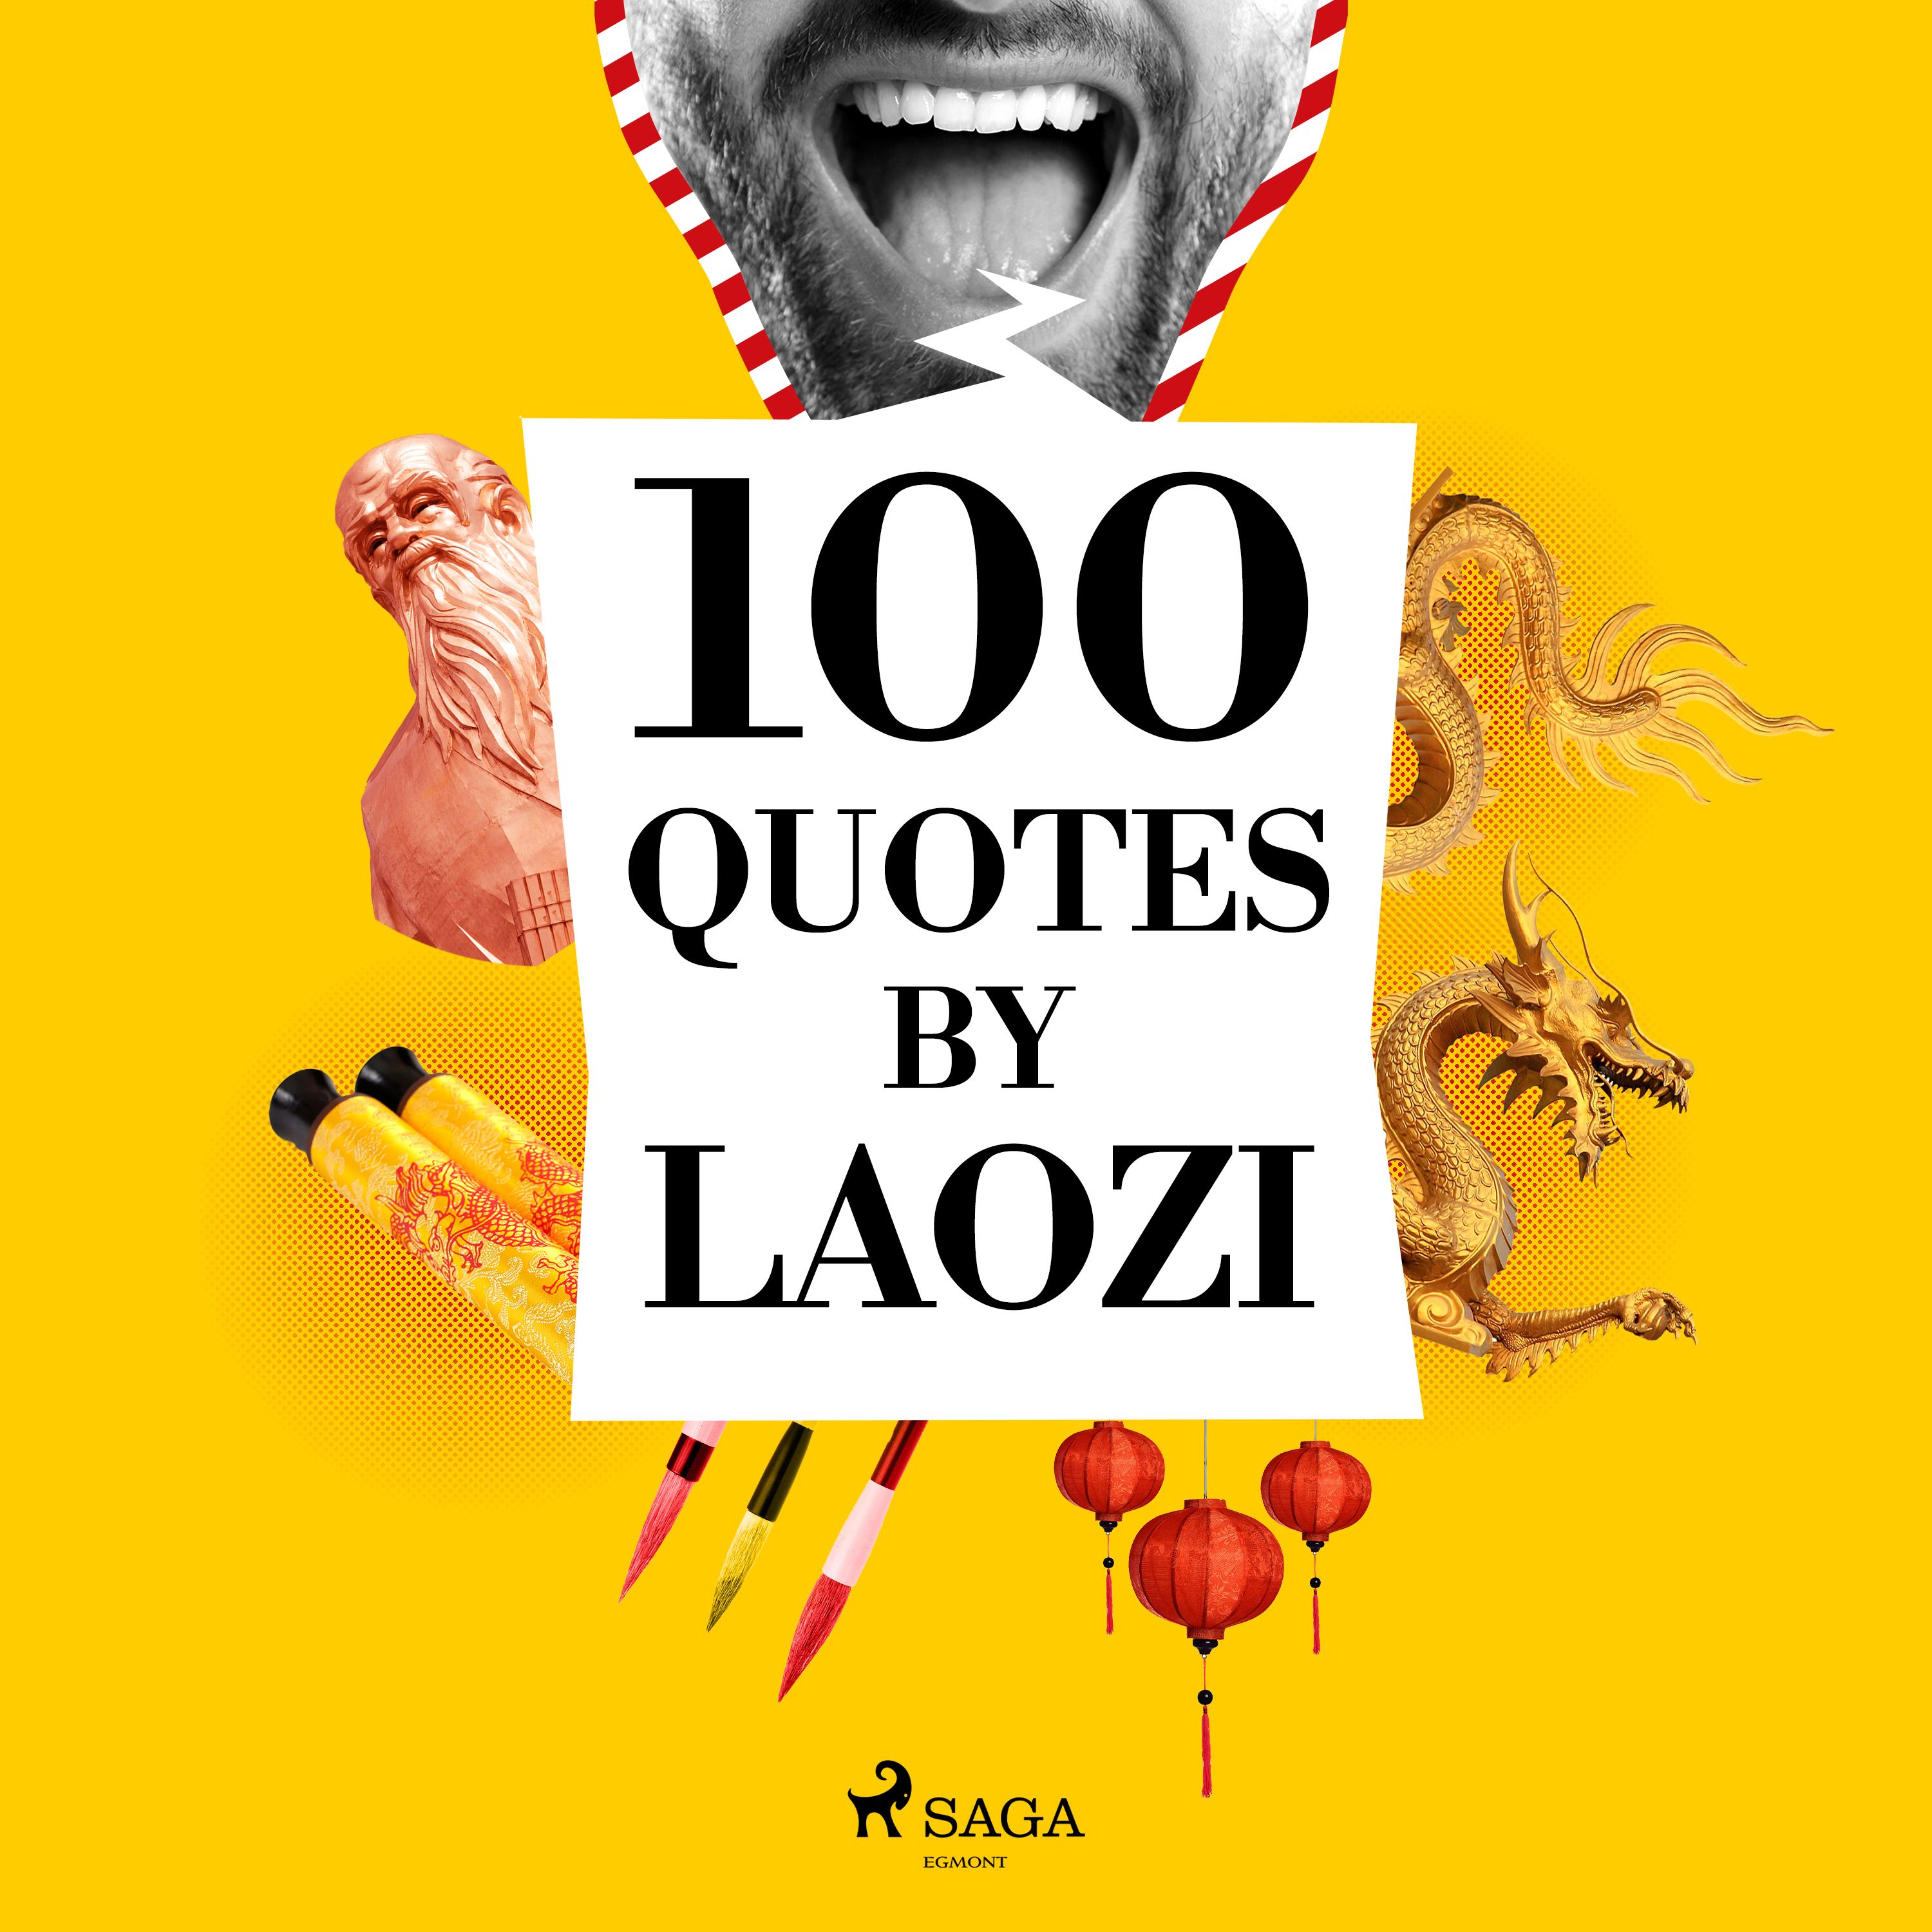 100 Quotes by Lao Tseu, audiobook by Lao Zi